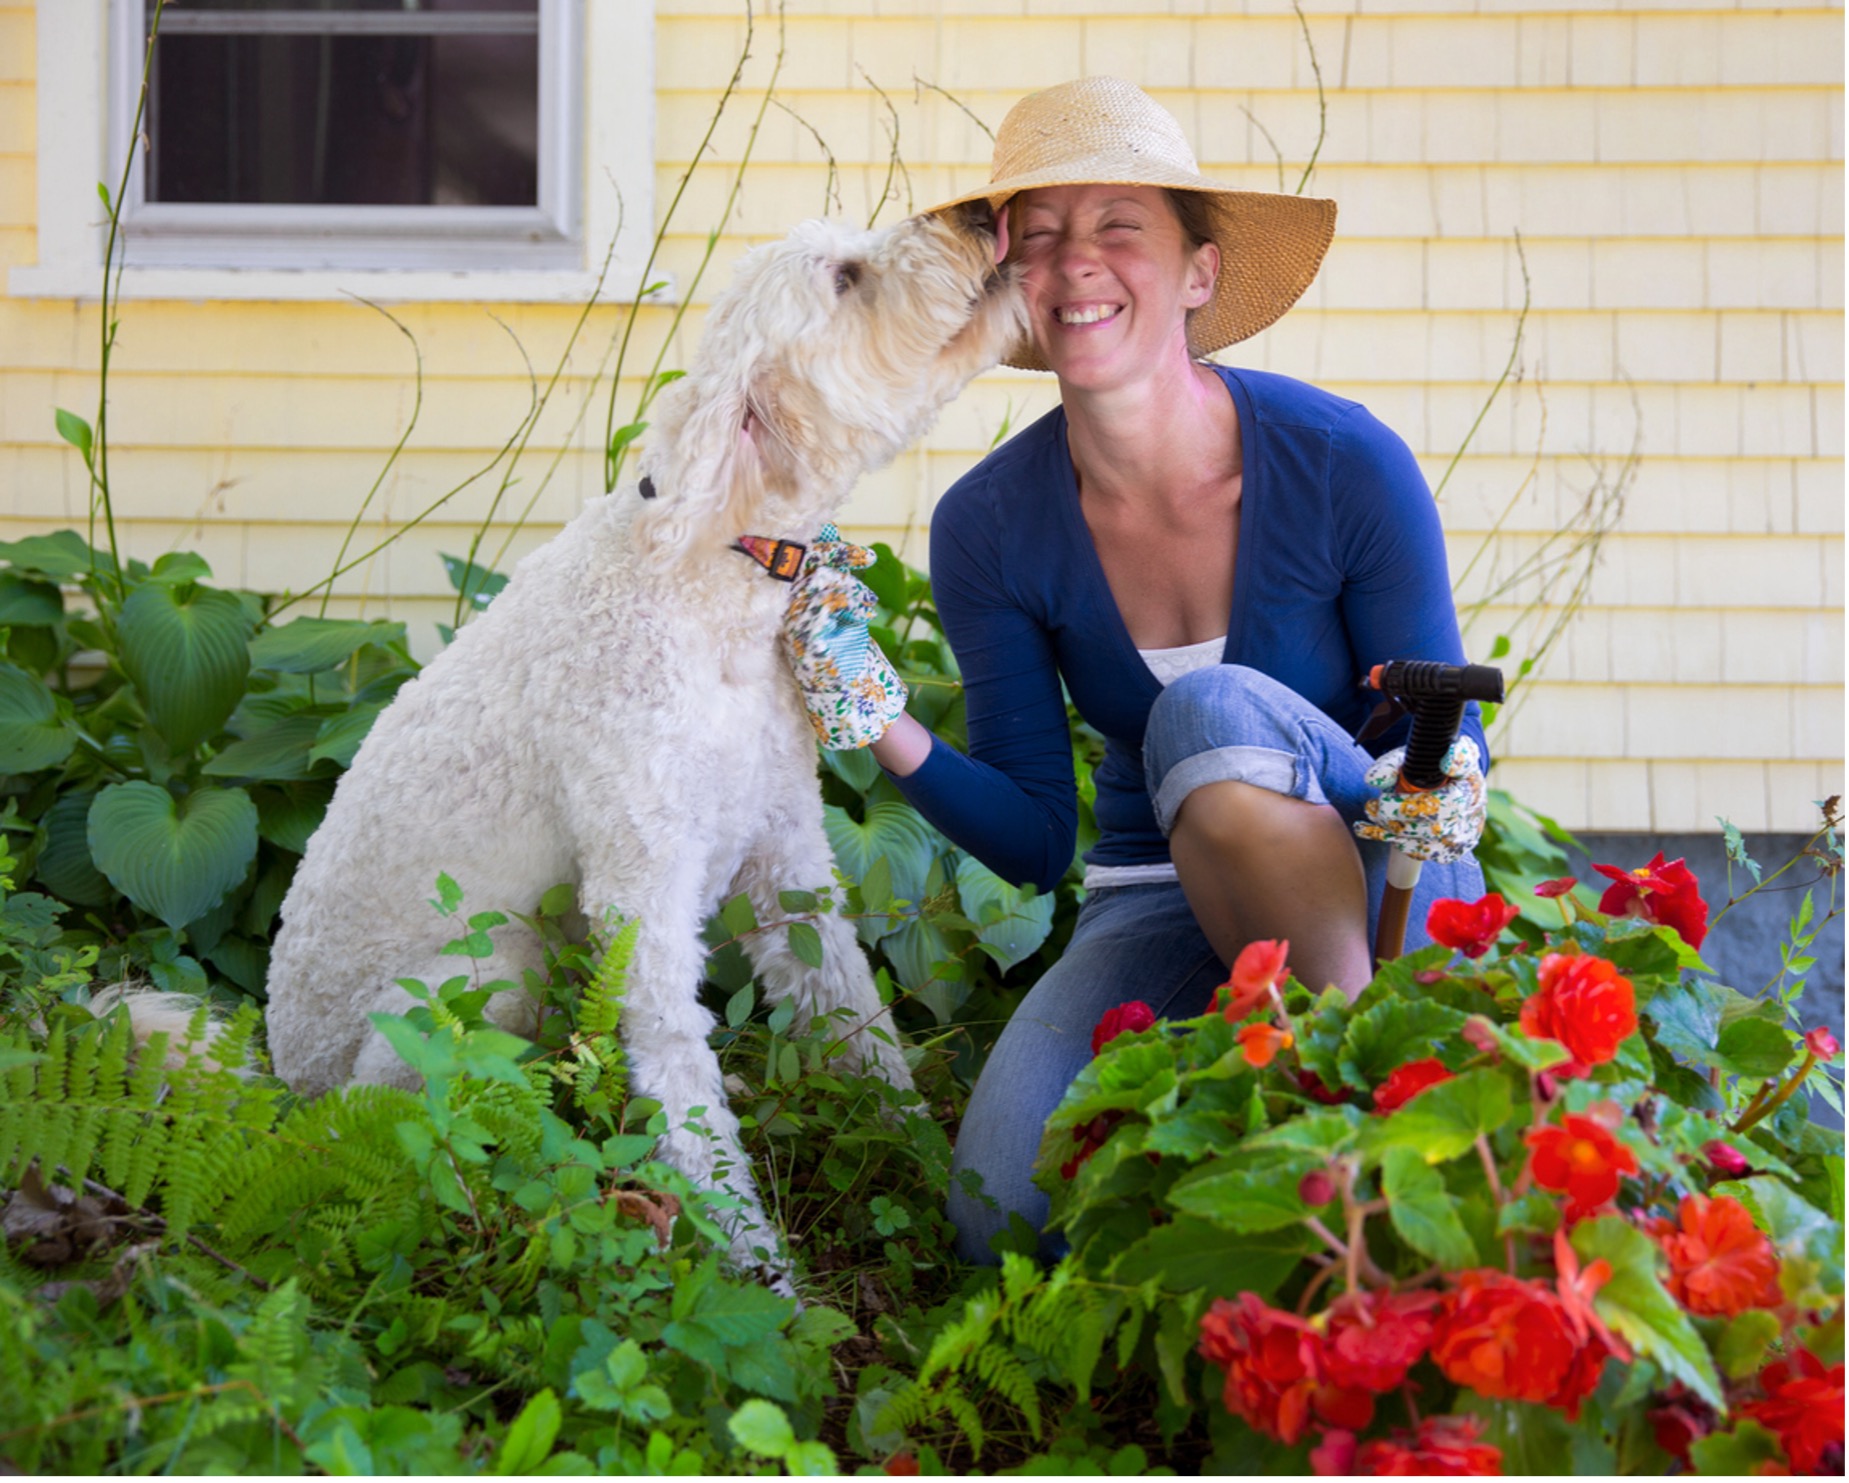 A picture containing person being licked by a dog in a plant rich garden